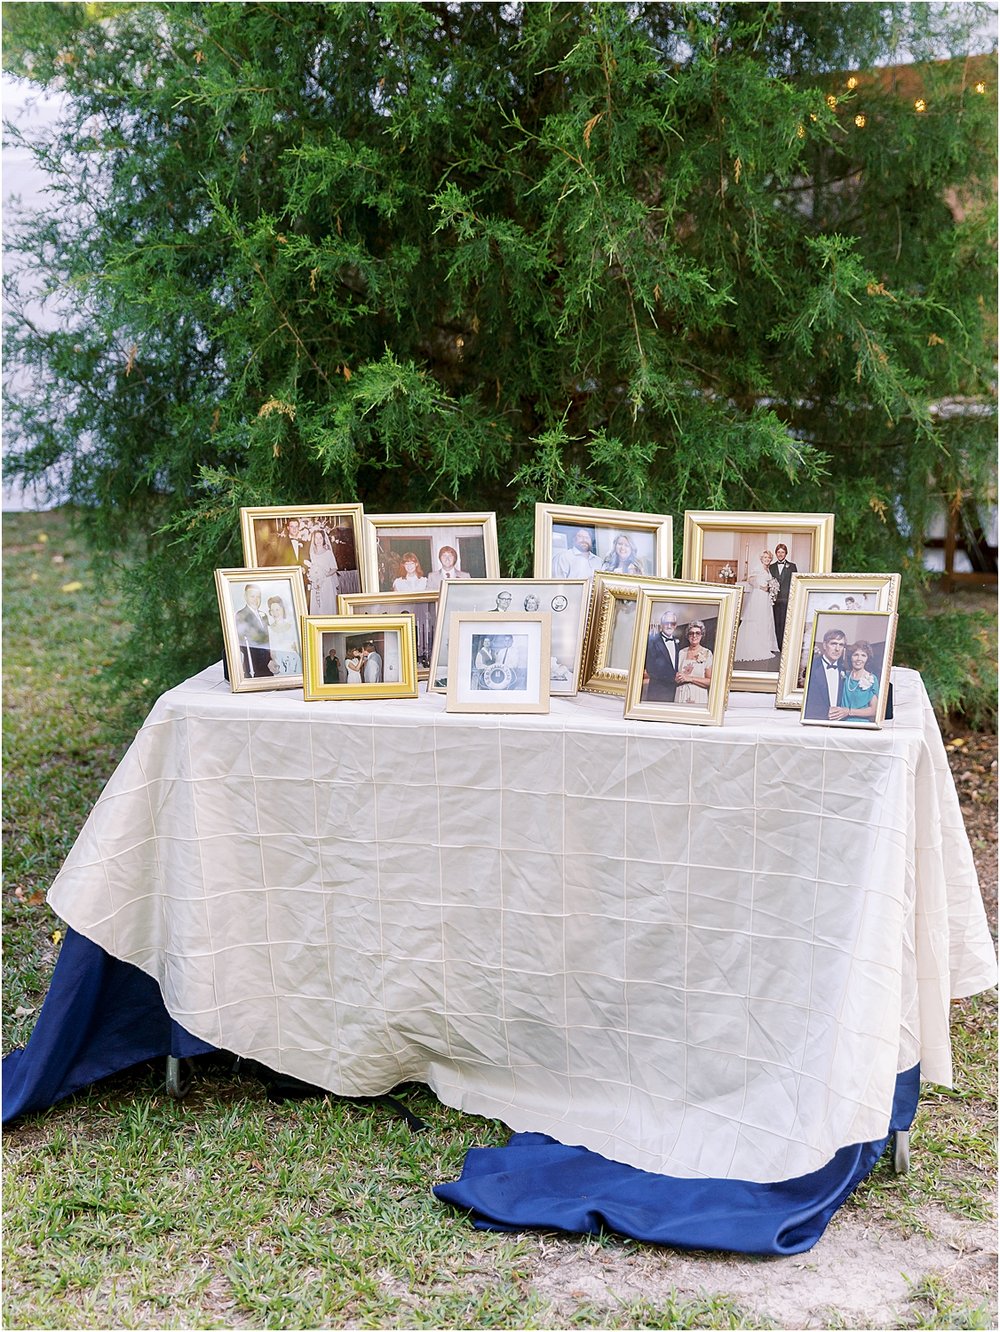 Wedding memory table with framed pictures